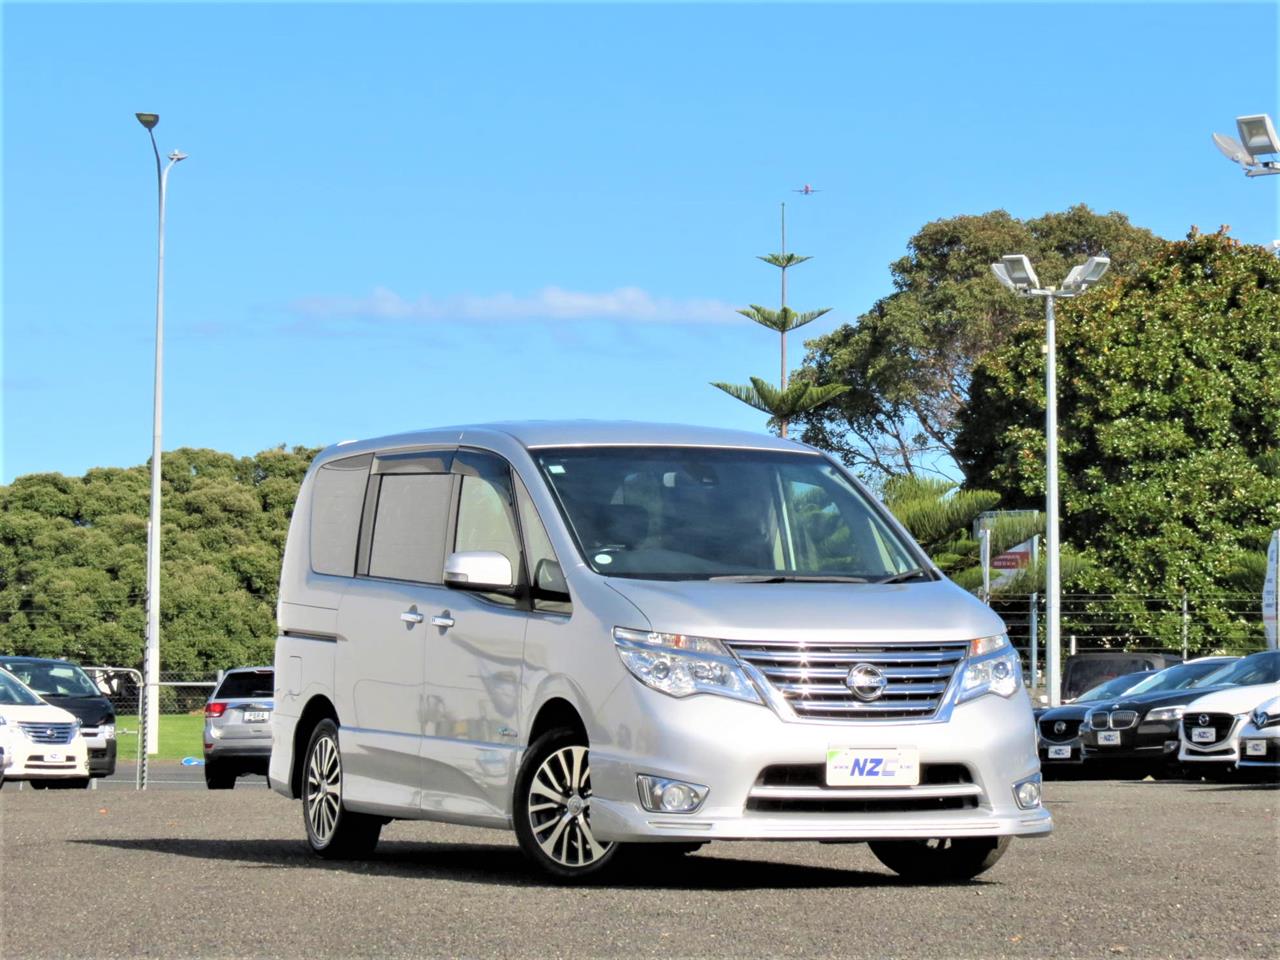 NZC 2014 Nissan Serena just arrived to Auckland